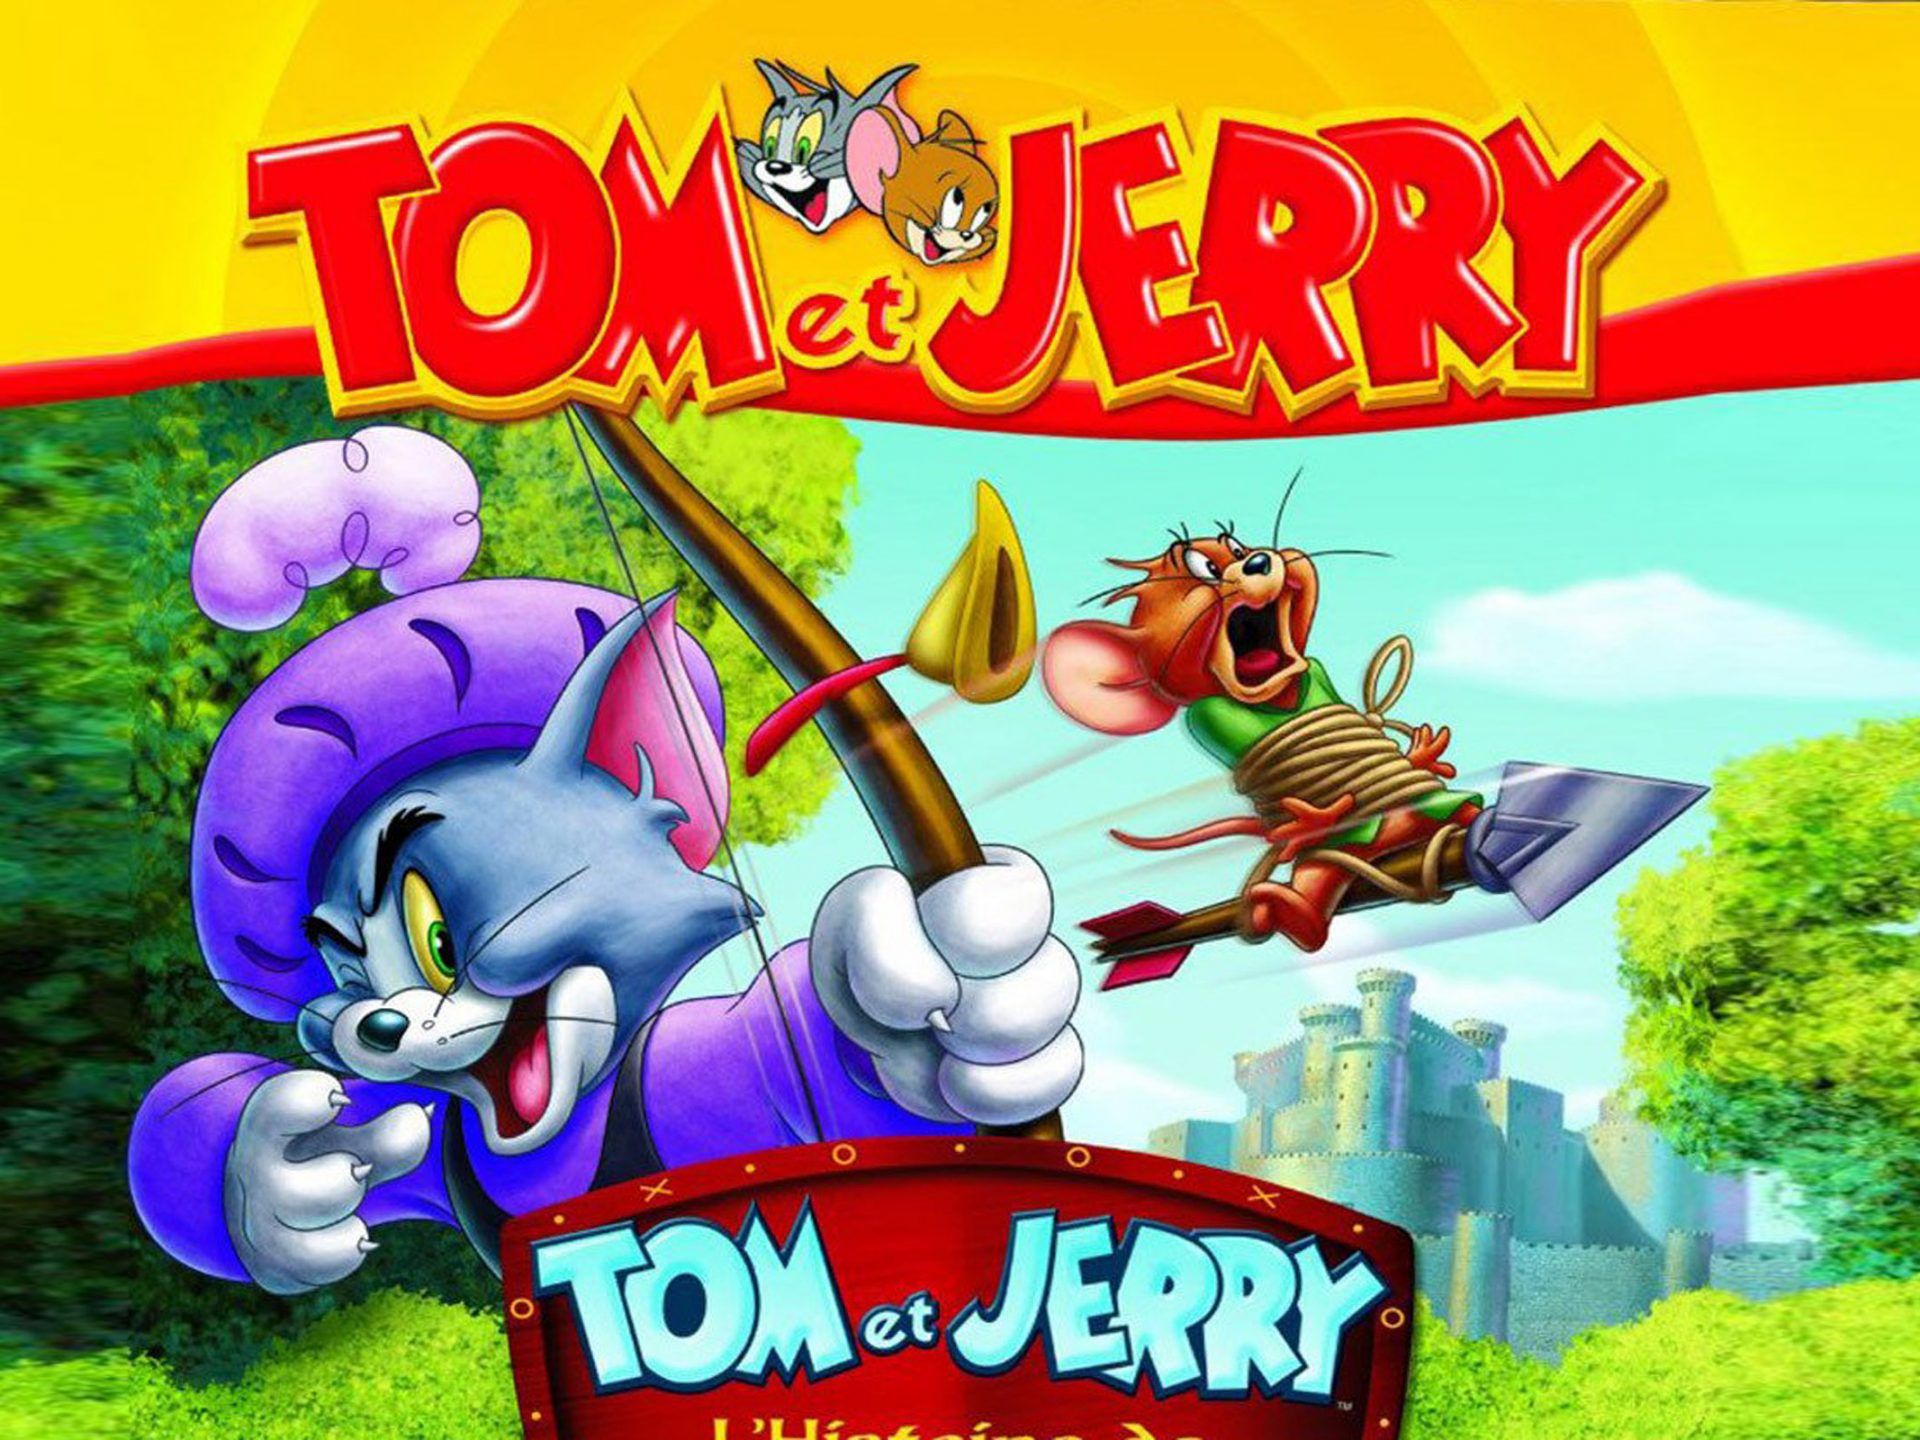 Tom And Jerry Cartoon Robin Hood And His Merry Mouse Desktop Wallpaper HD Free Download 2560x1600, Wallpaper13.com